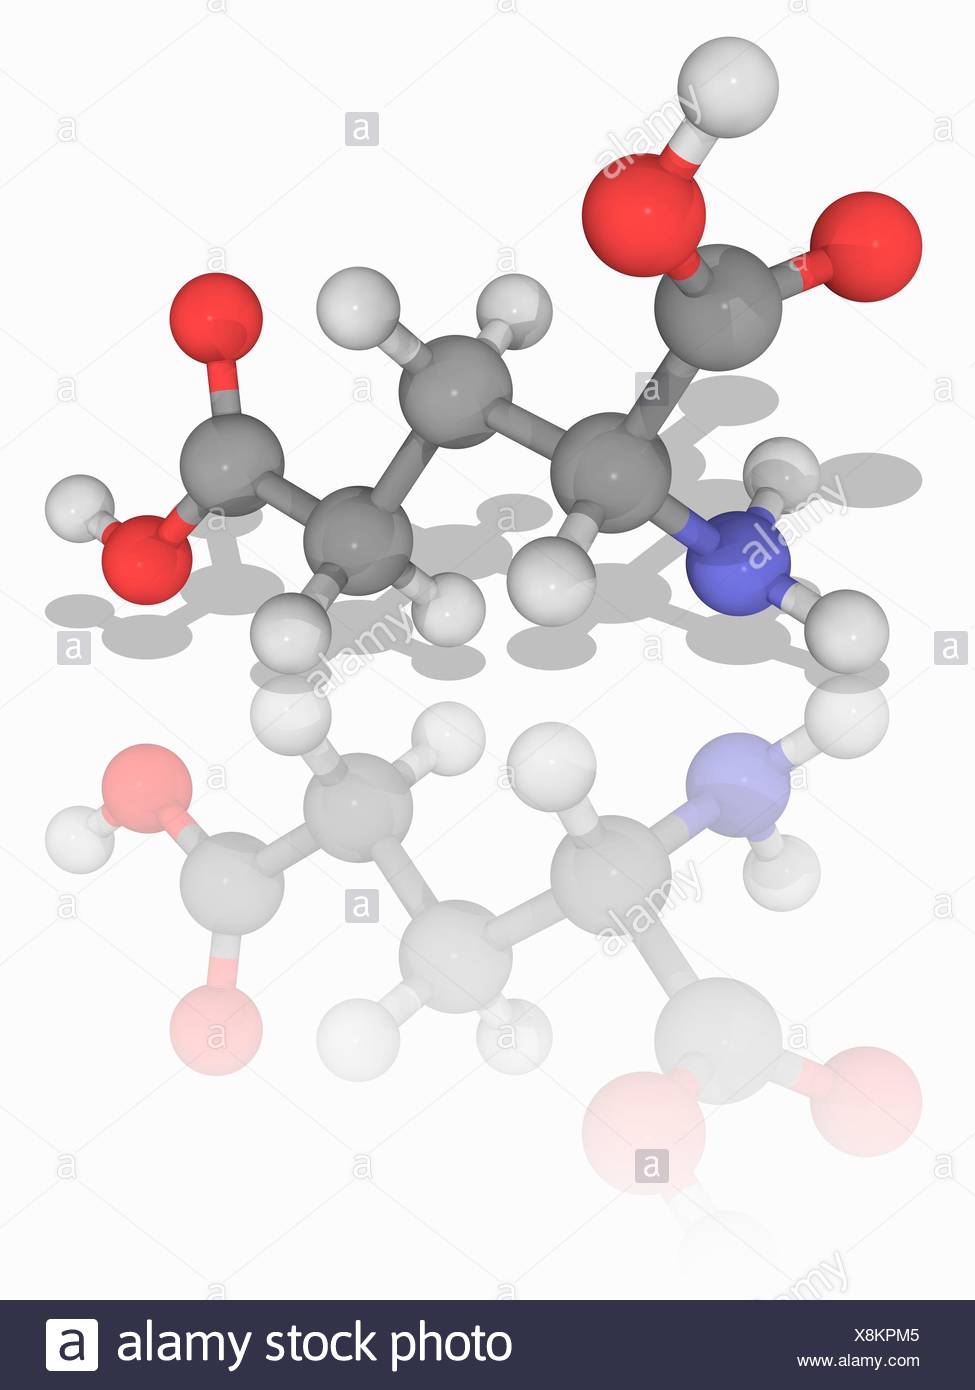 Glutamic Acid Molecular Model Of The Non Essential Amino Acid Glutamic Acid C5 H9 N O4 This Dicarboxylic Acid Is One Of The Amino Acids That Is A Precursor To Proteins It Is Also An Important